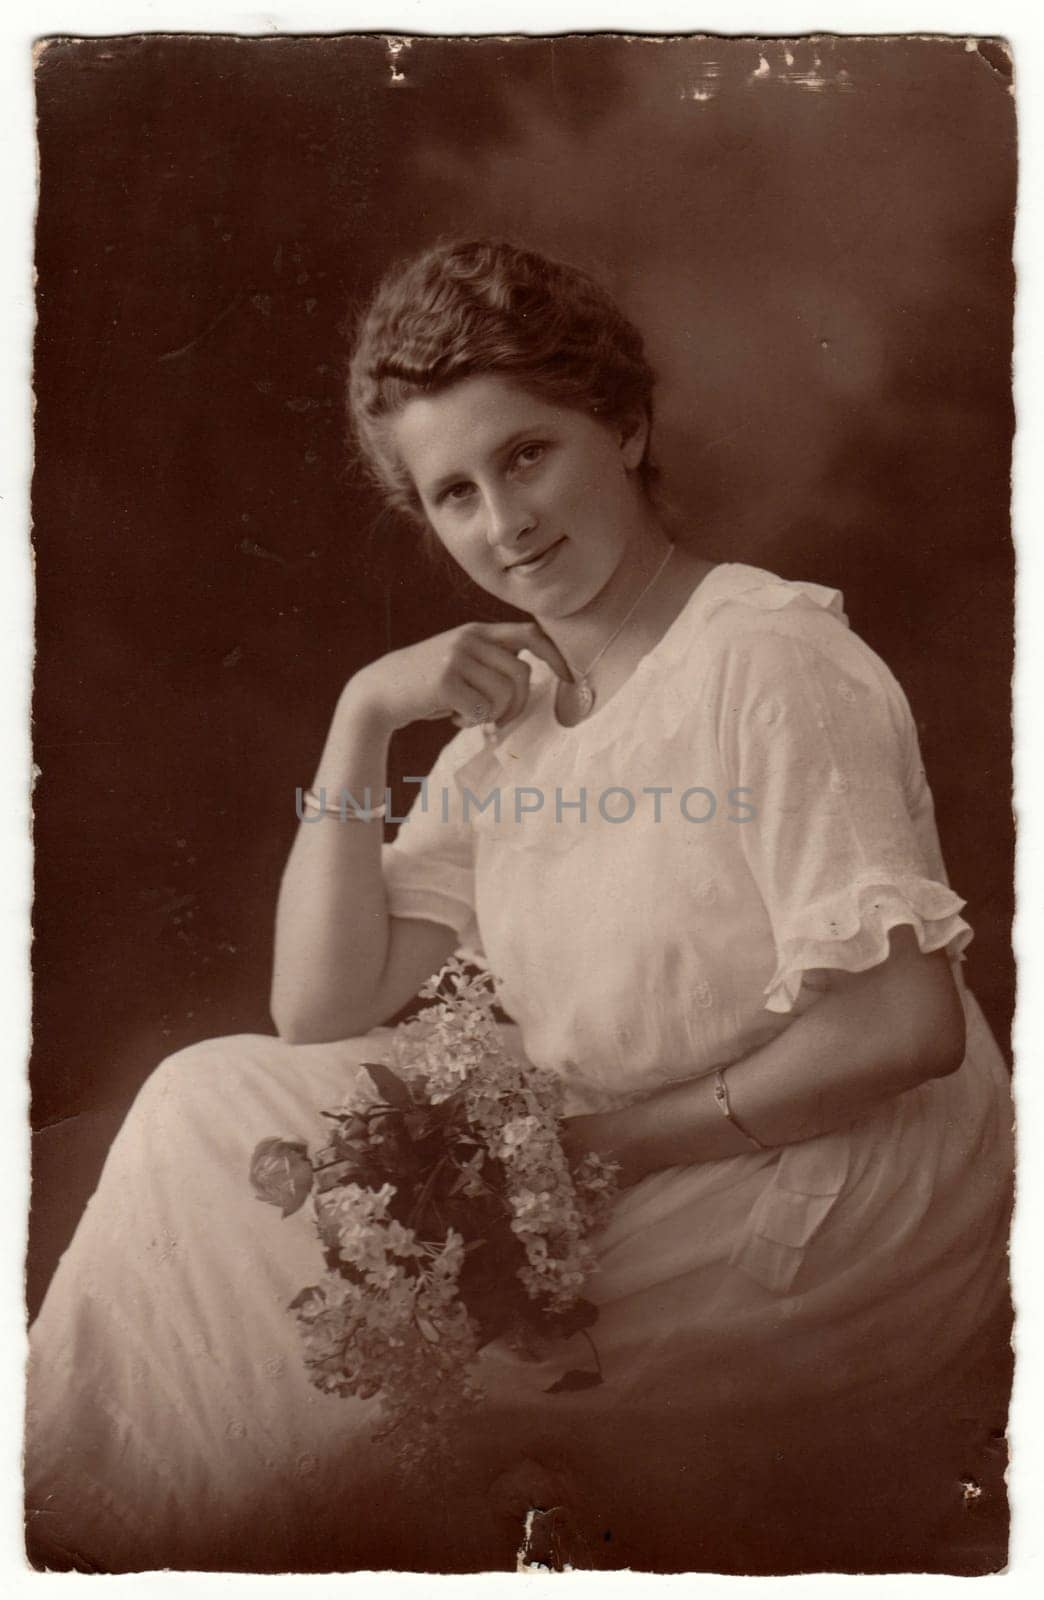 Vintage photo shows woman with short hair. Woman wears white dress and holds bouquet - bunch of flowers. Retro black and white studio photography with sepia effect. Circa 1920s. by roman_nerud